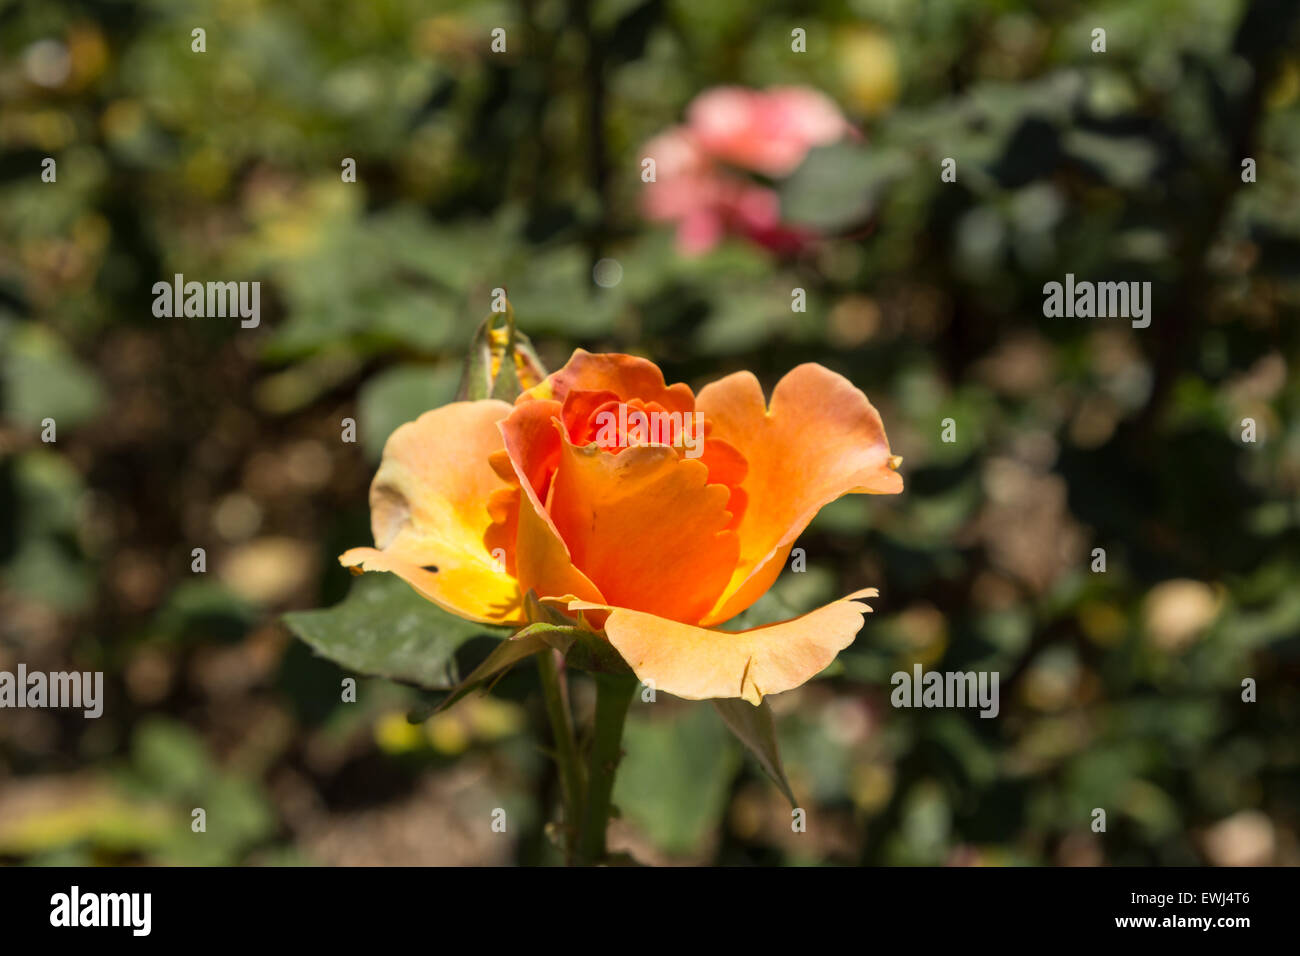 Peach rose, Rosa, blooms in spring in the garden Stock Photo